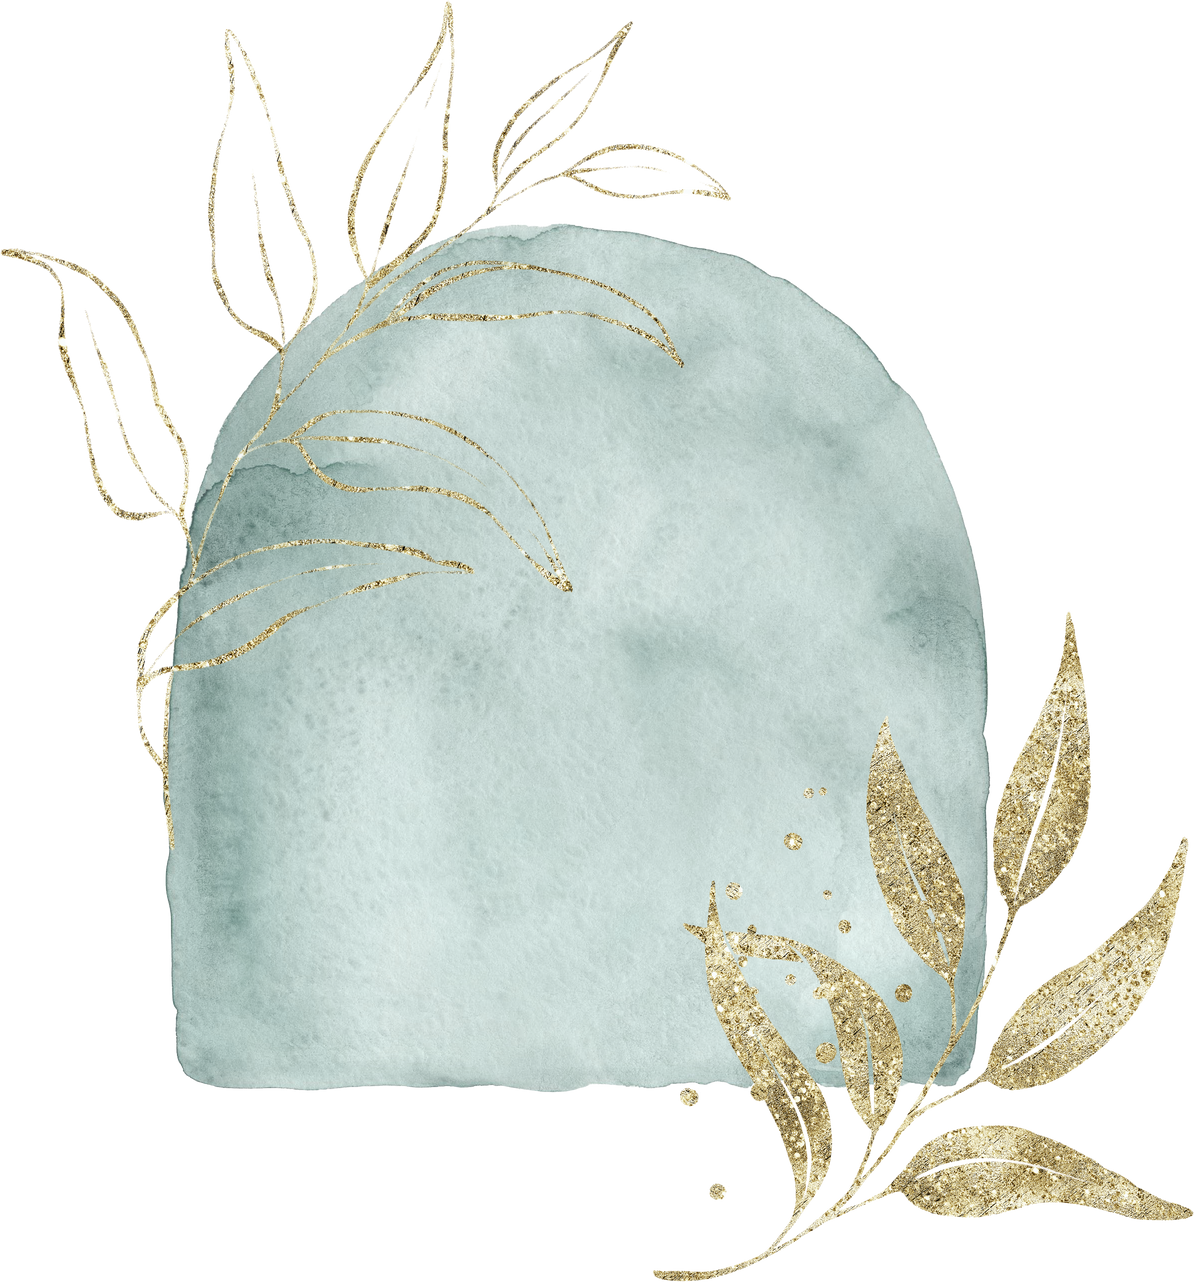 Watercolor abstract shape with gold decorative leaves.